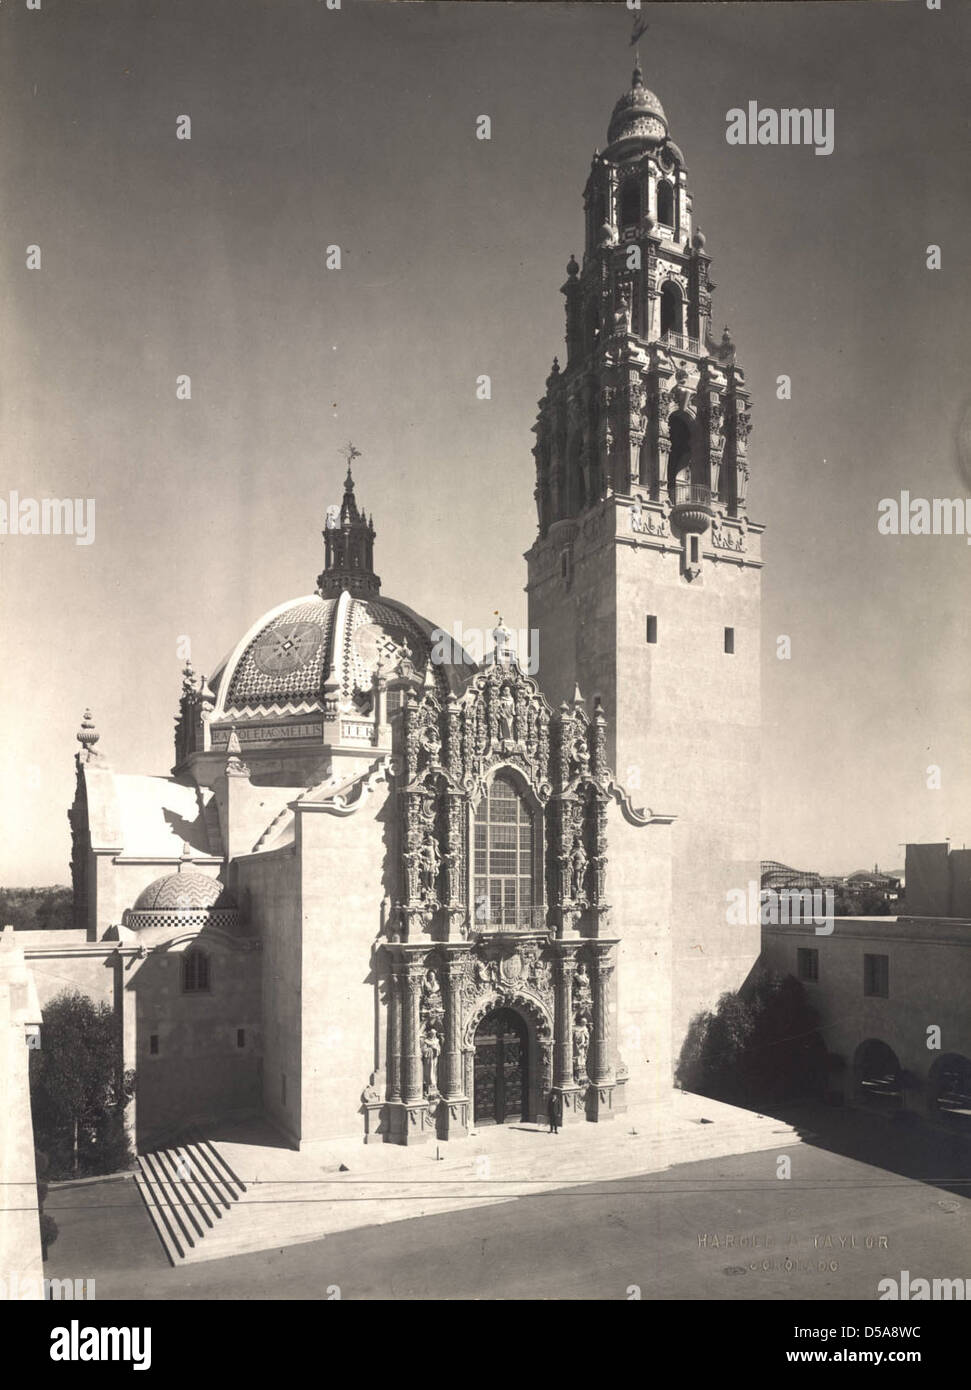 California State Building, 1915 Panama-California Exposition Banque D'Images